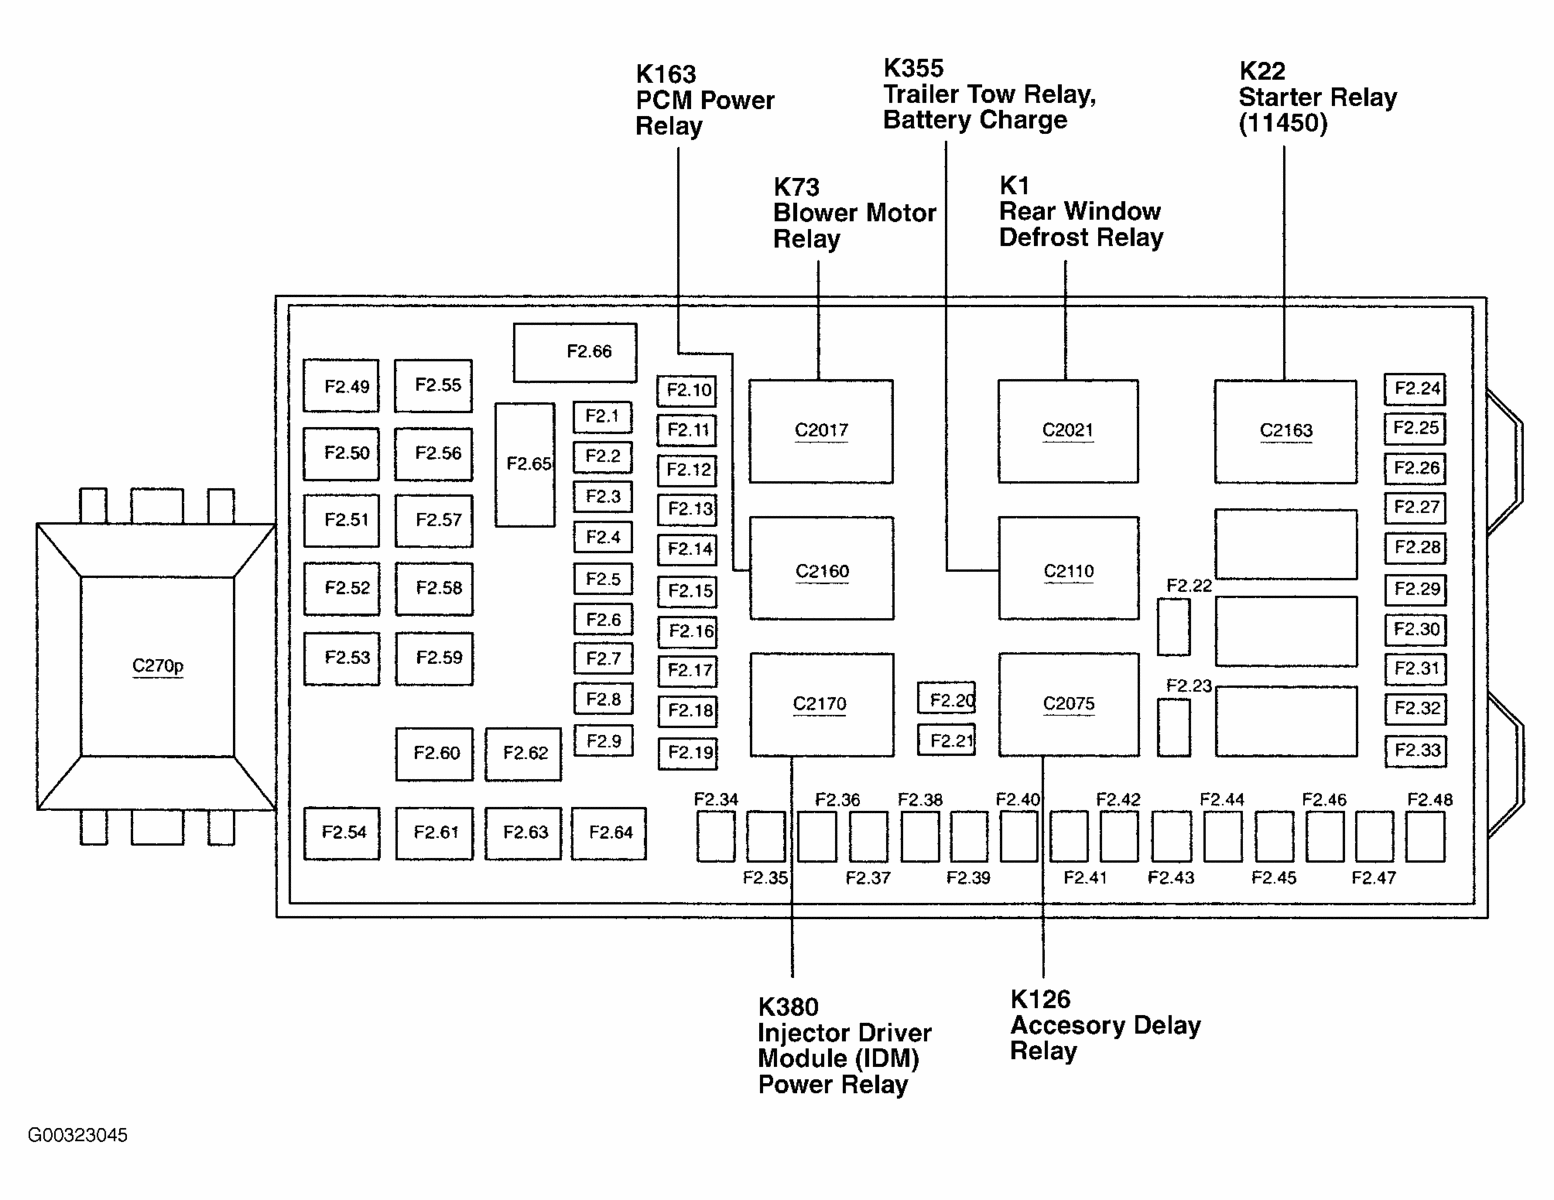 2008 Ford Super Duty Stereo Wiring Diagram from static.cargurus.com